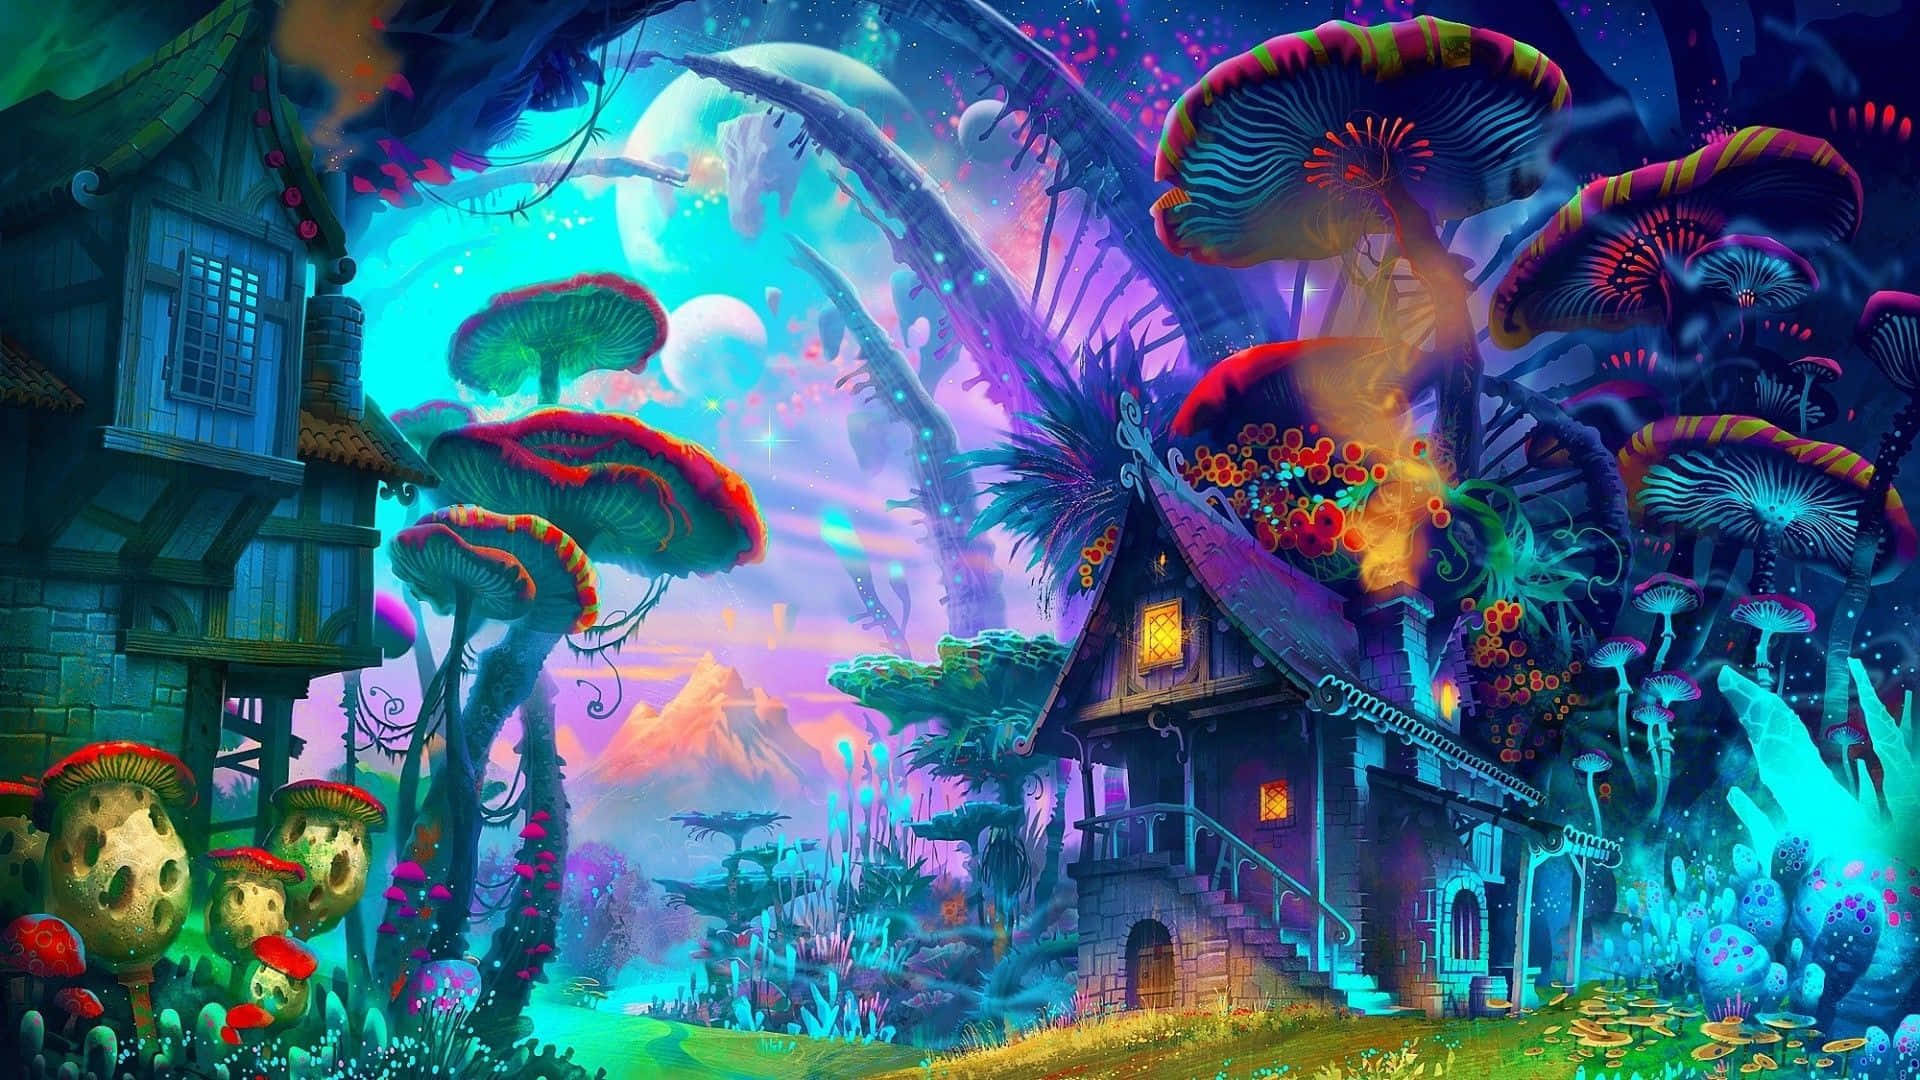 Step into a surreal journey with this Trippy Desktop Wallpaper